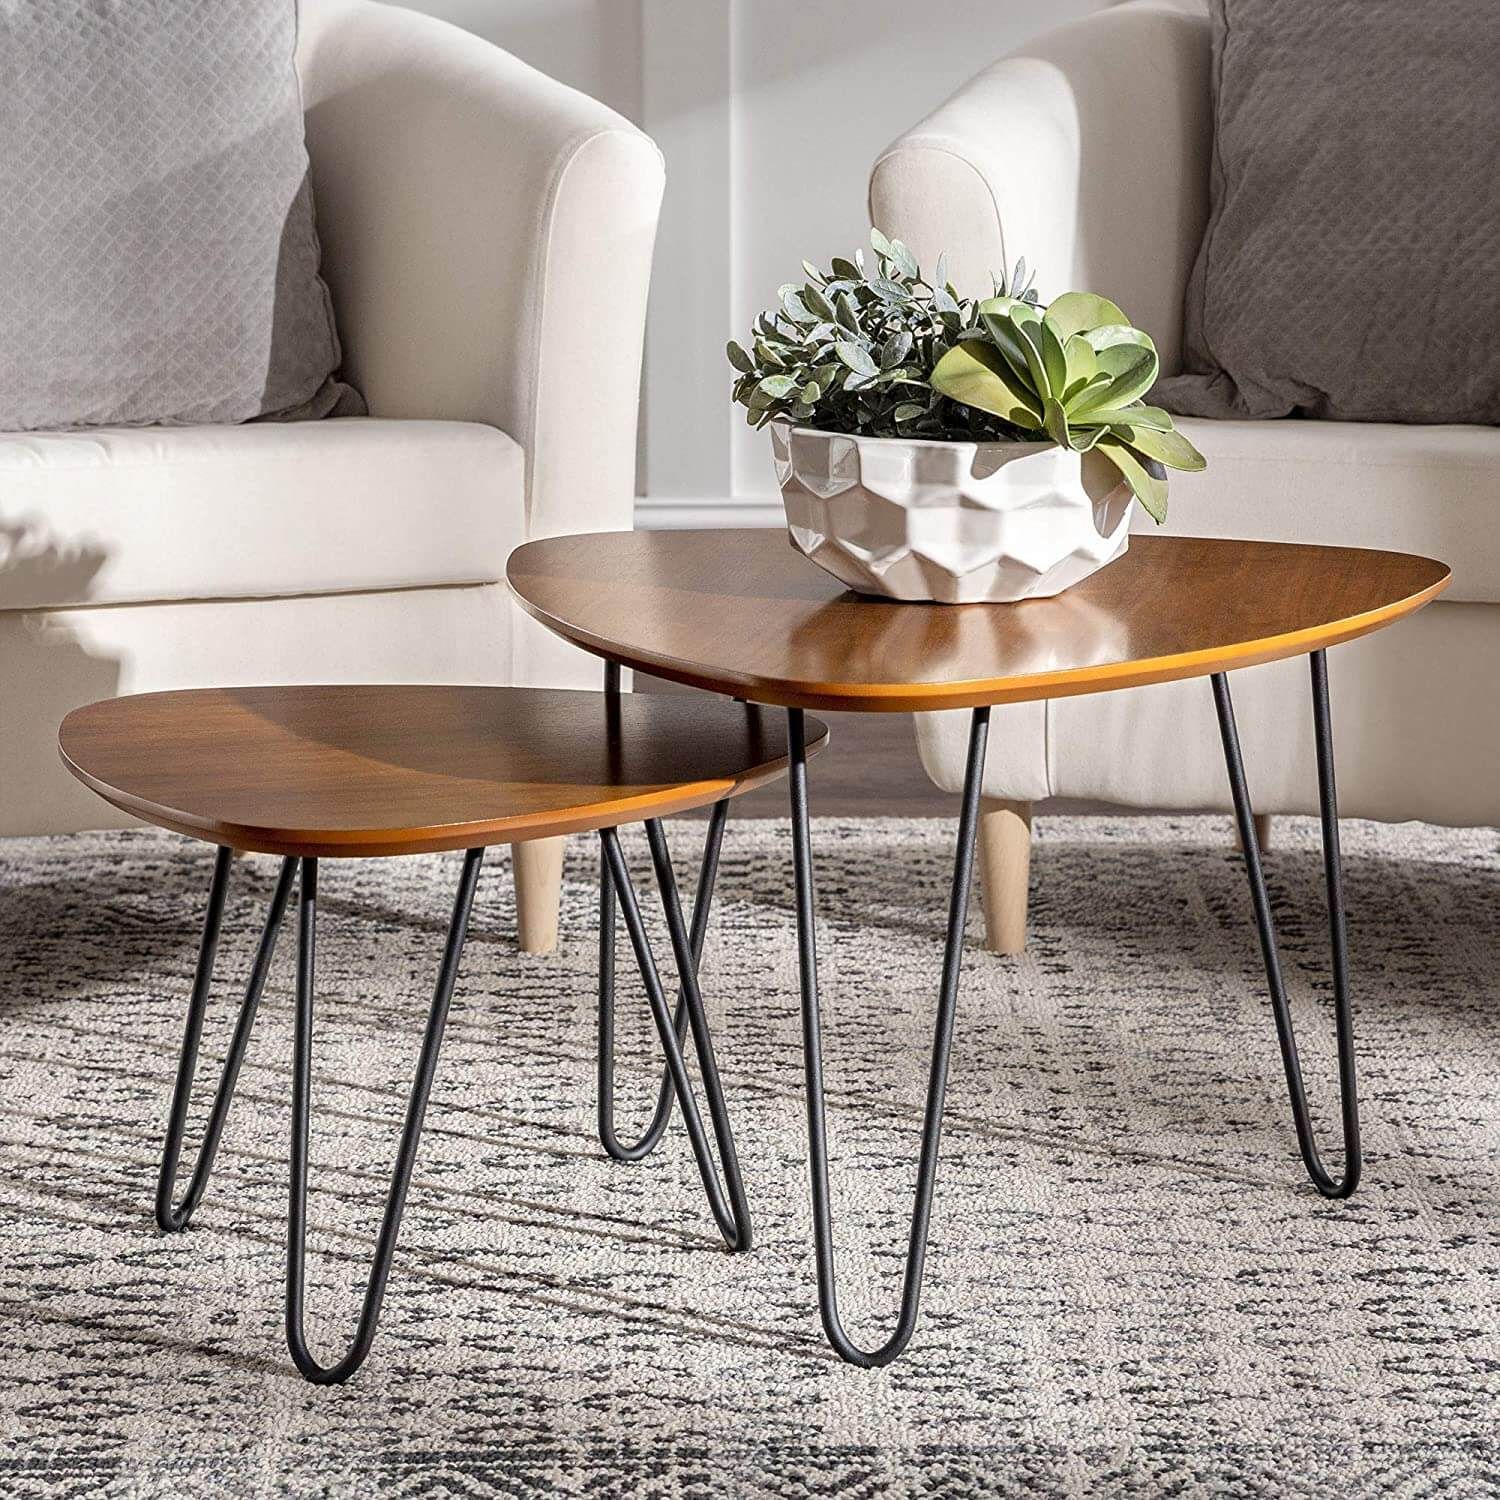 Choosing The Perfect Mid Century Modern Coffee Table – Oceanone Interiors Intended For Mid Century Modern Coffee Tables (View 14 of 15)